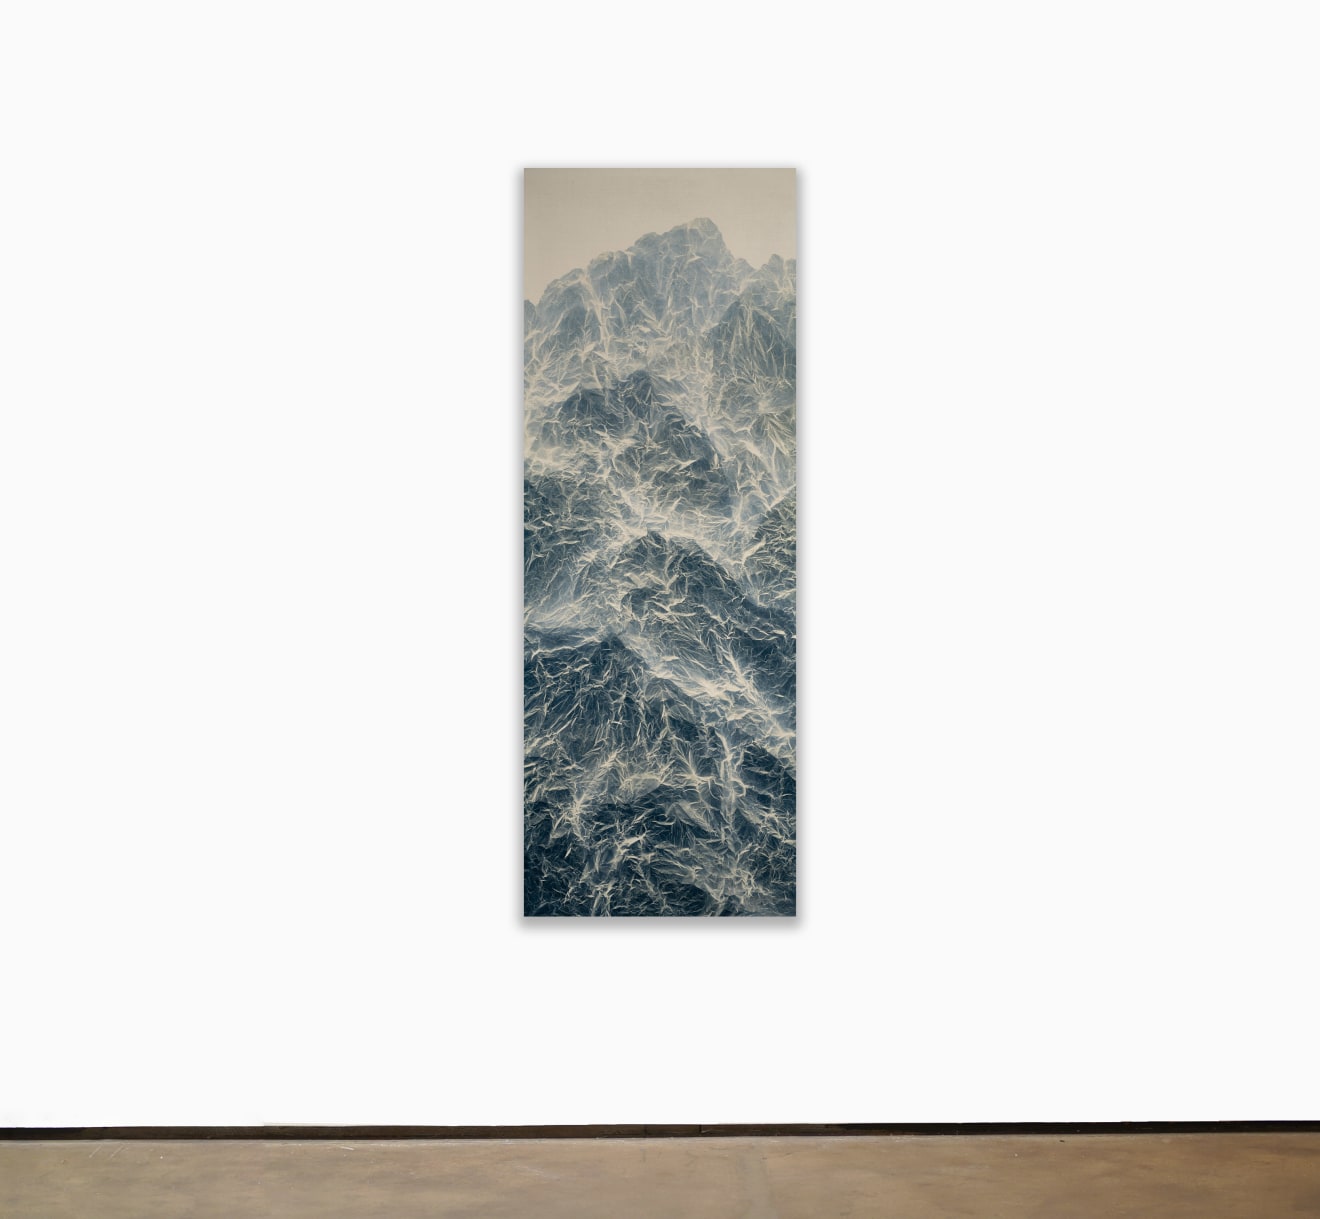 Wu Chi-Tsung Cyano-Collage 157, 2022 signed and dated by the artist, verso cyanotype photography, Xuan paper, acrylic gel, acrylic, mounted on wooden board 74 13/16 x 27 9/16 inches (190 x 70 cm) (WCT-70)